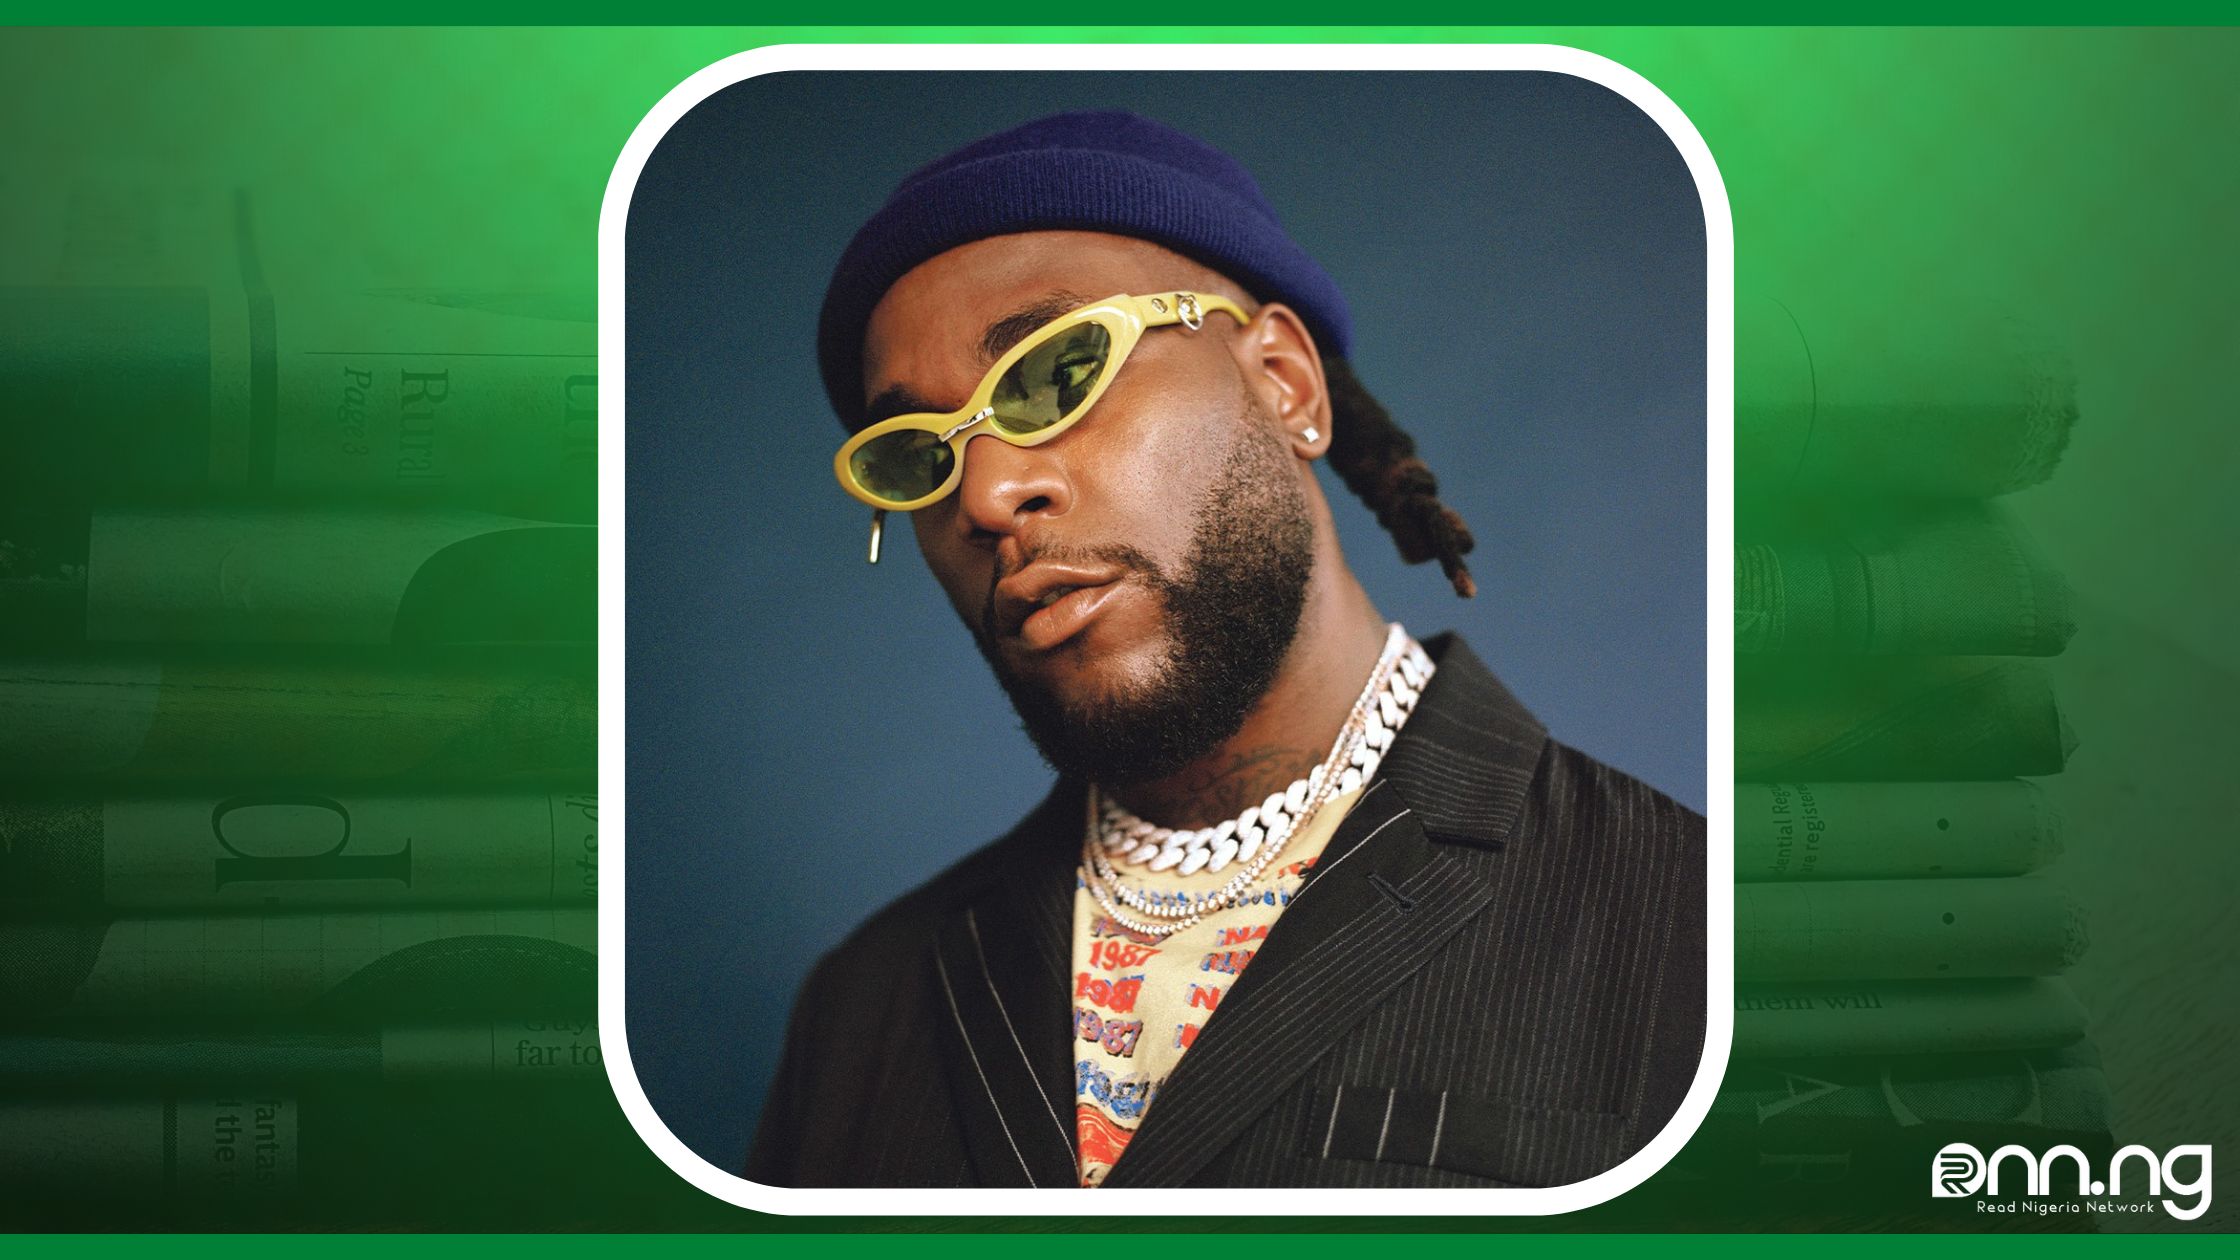 Burnaboy Bags 'Best African Act' Award At The MTV EMAS 2022